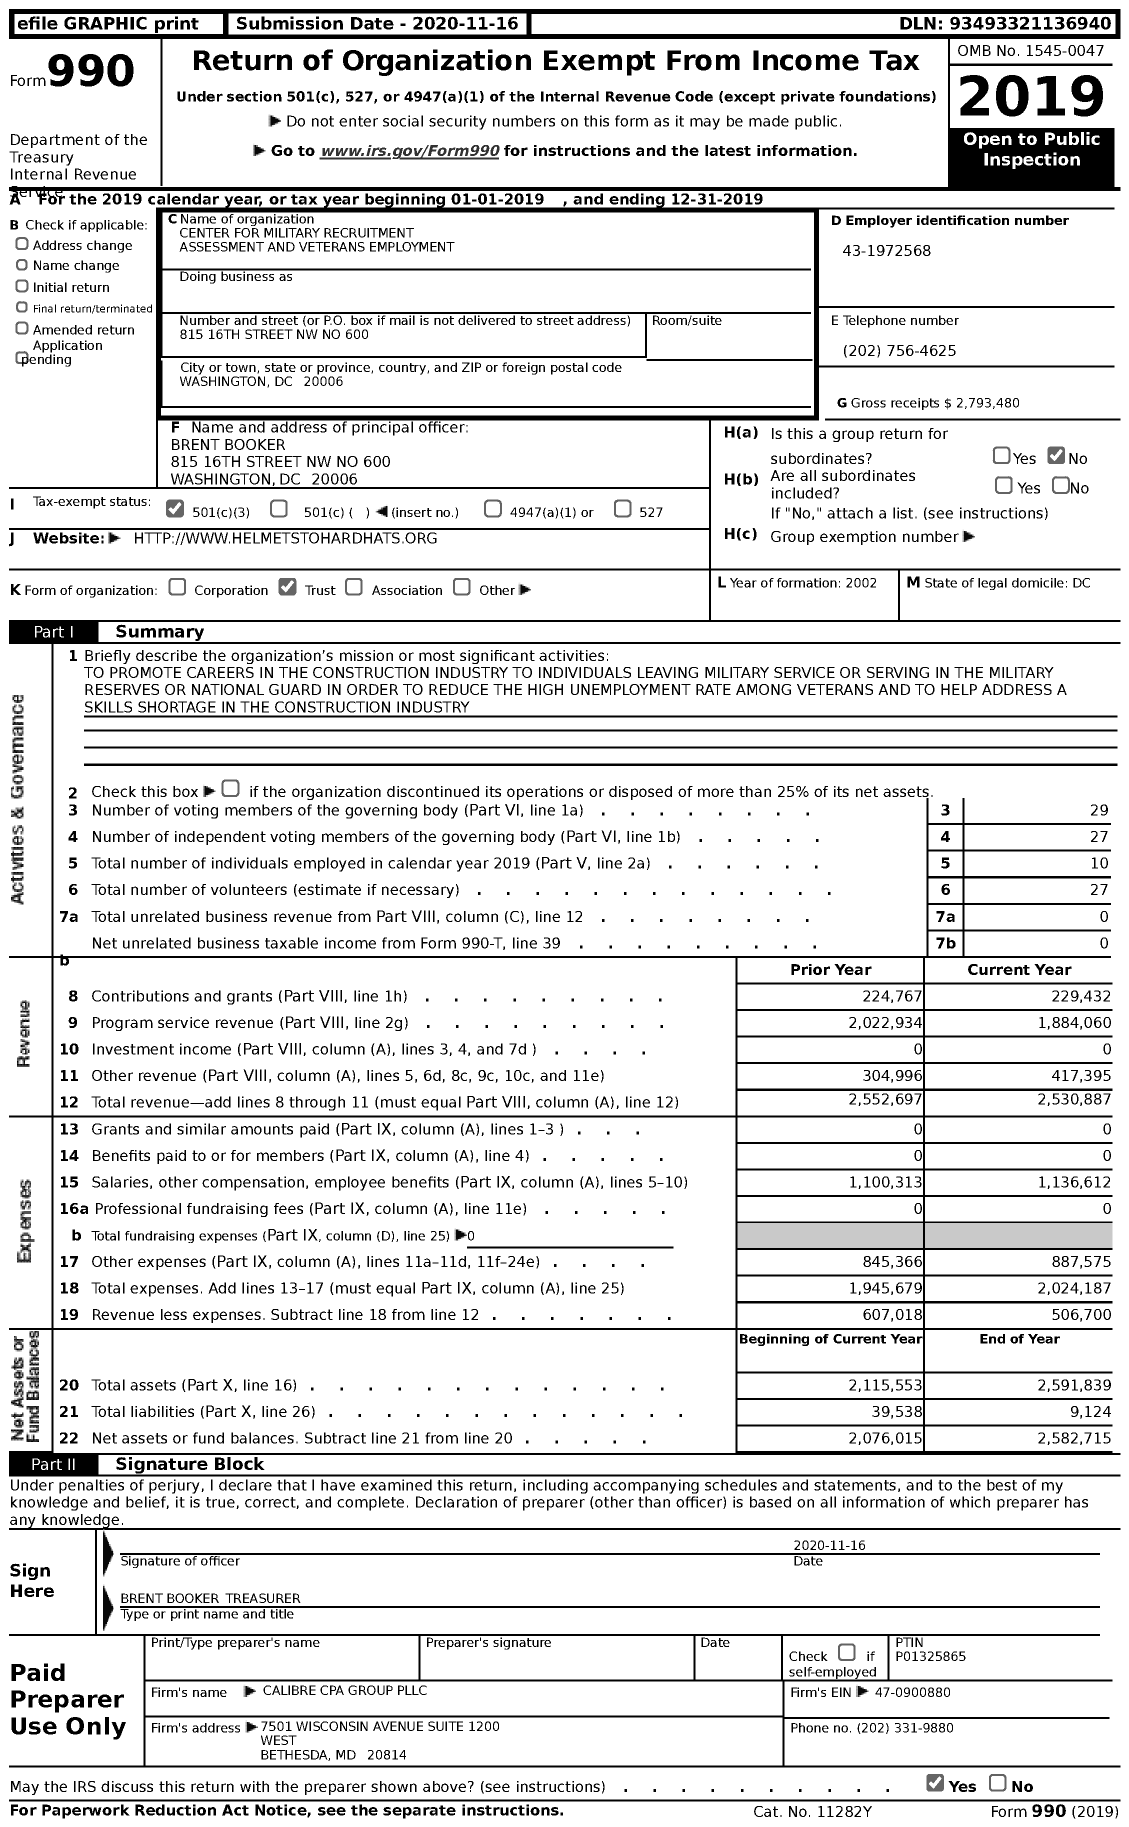 Image of first page of 2019 Form 990 for Center for Military Recruitment Assessment and Veterans Employment